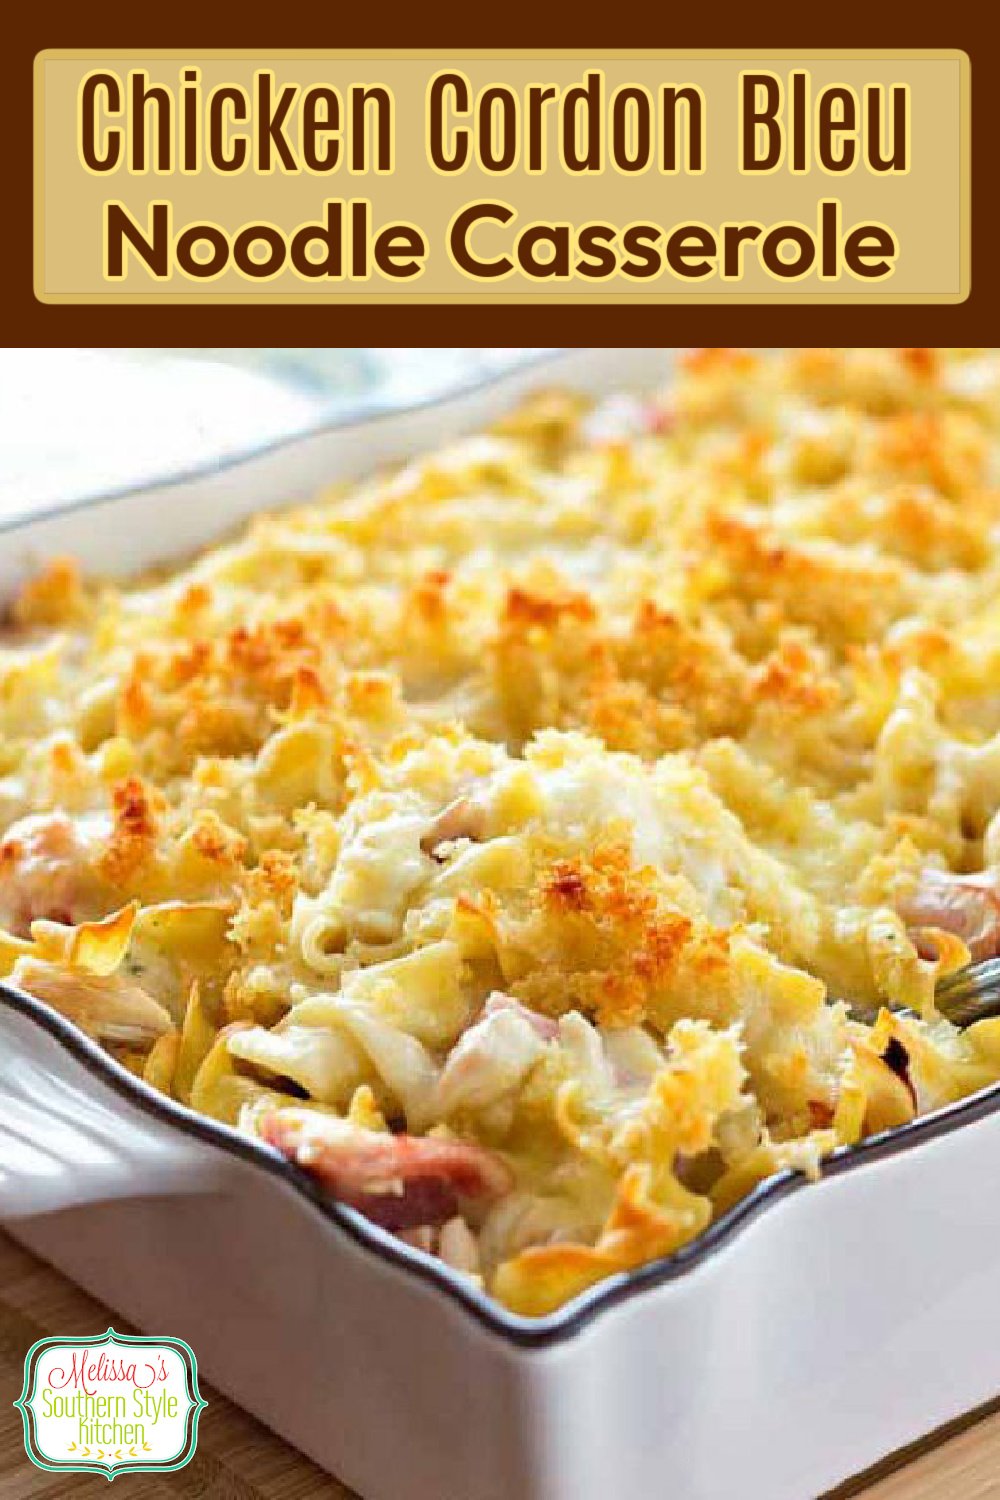 Chicken Cordon Bleu Noodle Casserole takes classic flavors and transforms then them into a family friendly meal #easychickenrecipes #chickencasseroles #chickencordonbleu #chickennoodlecasserole #noodles #noodlerecipes #pasta